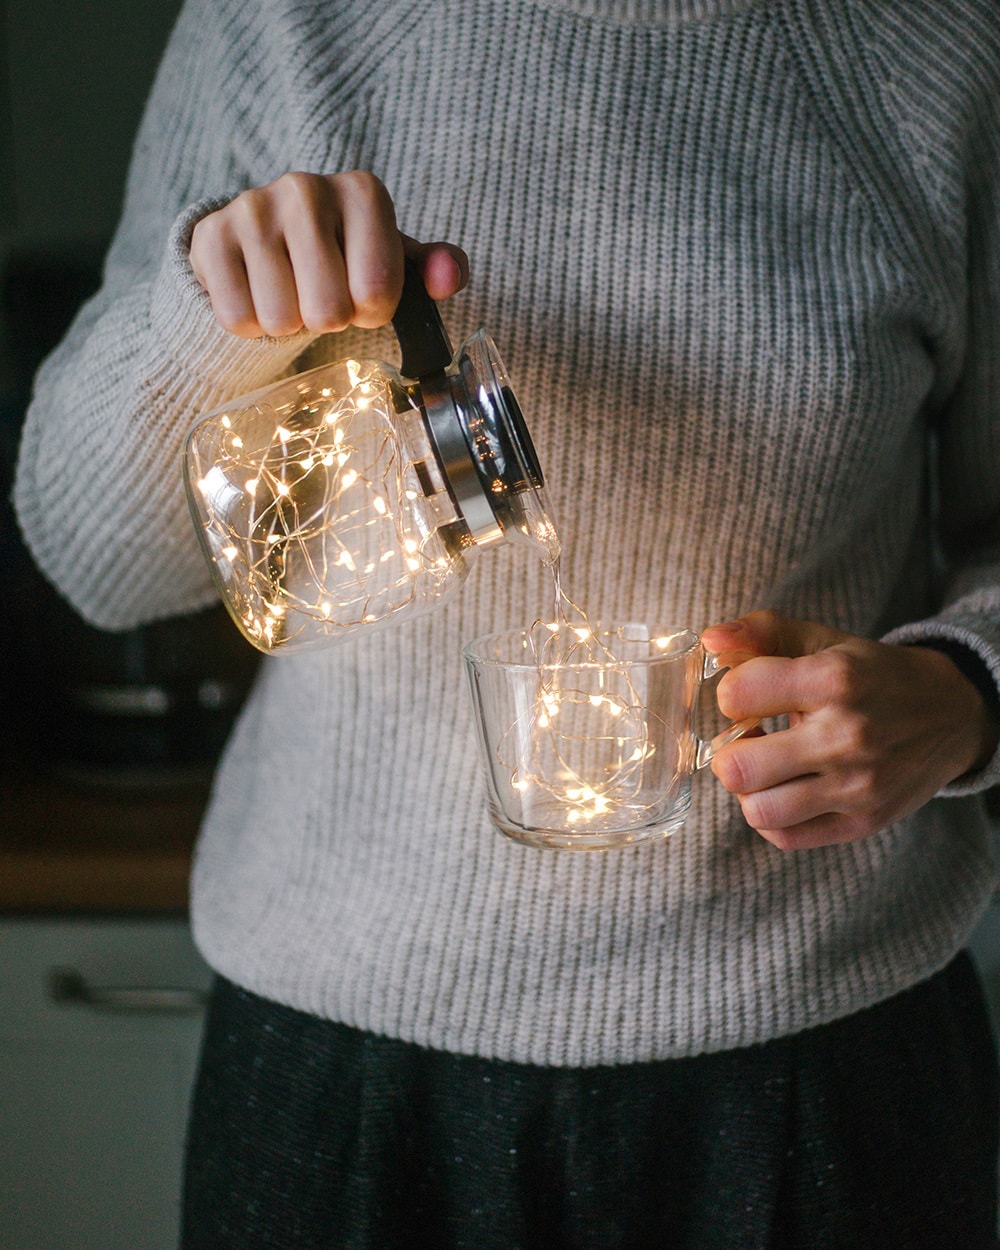 Faceless shot of woman holding glass cup and pouring glowing garland from pitcher.